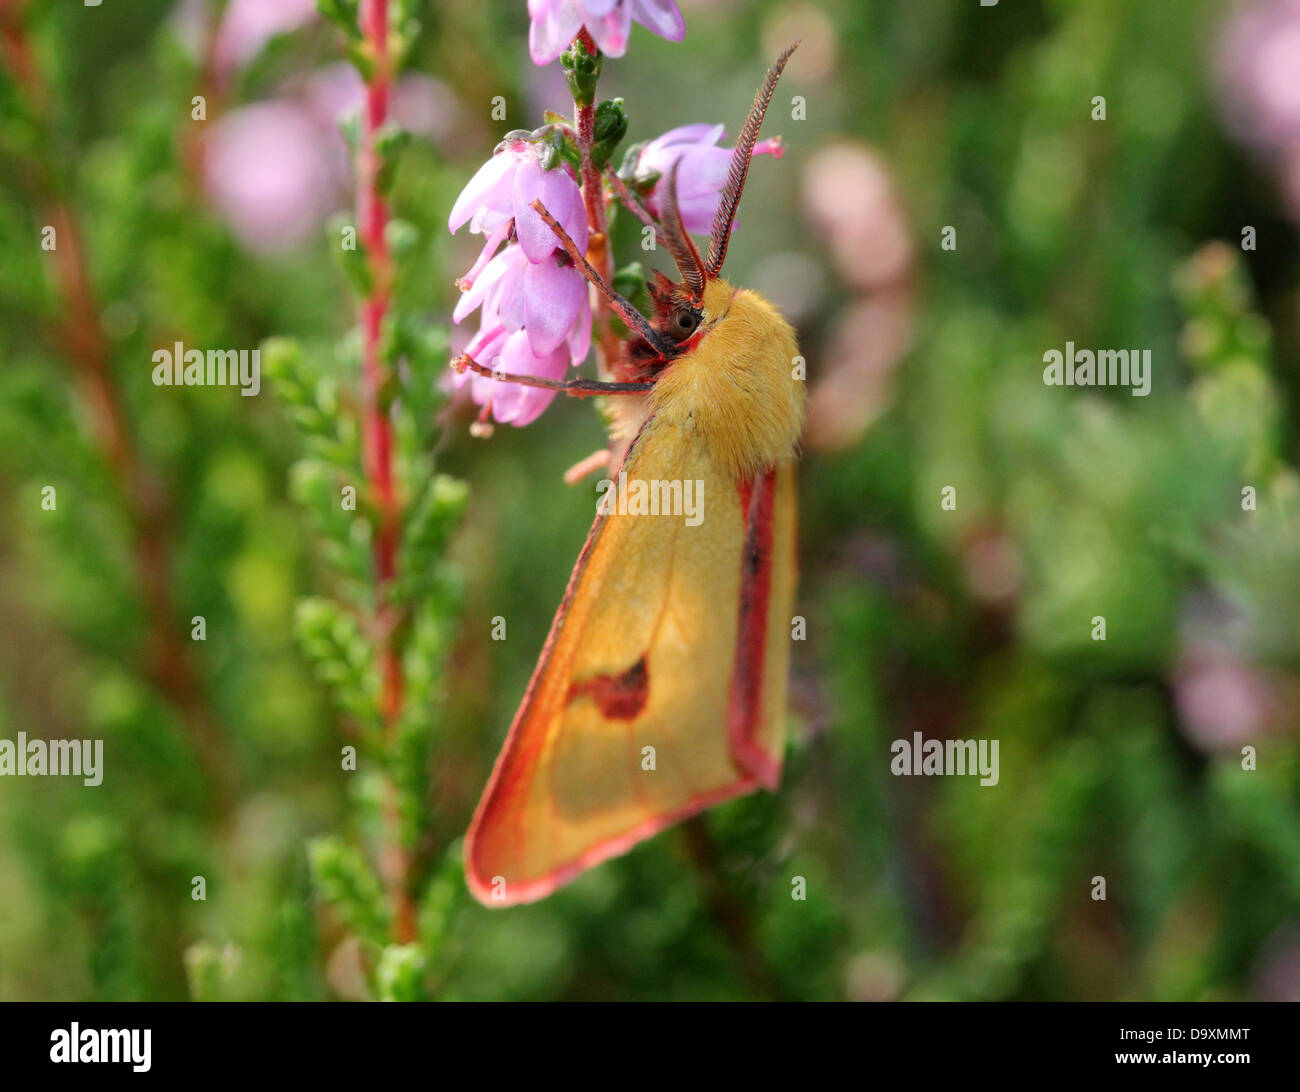 Male yellow Clouded Buff moth (Diacrisia sannio) foraging on Cross-leaved heath (Erica tetralix)  - 12 images in series Stock Photo